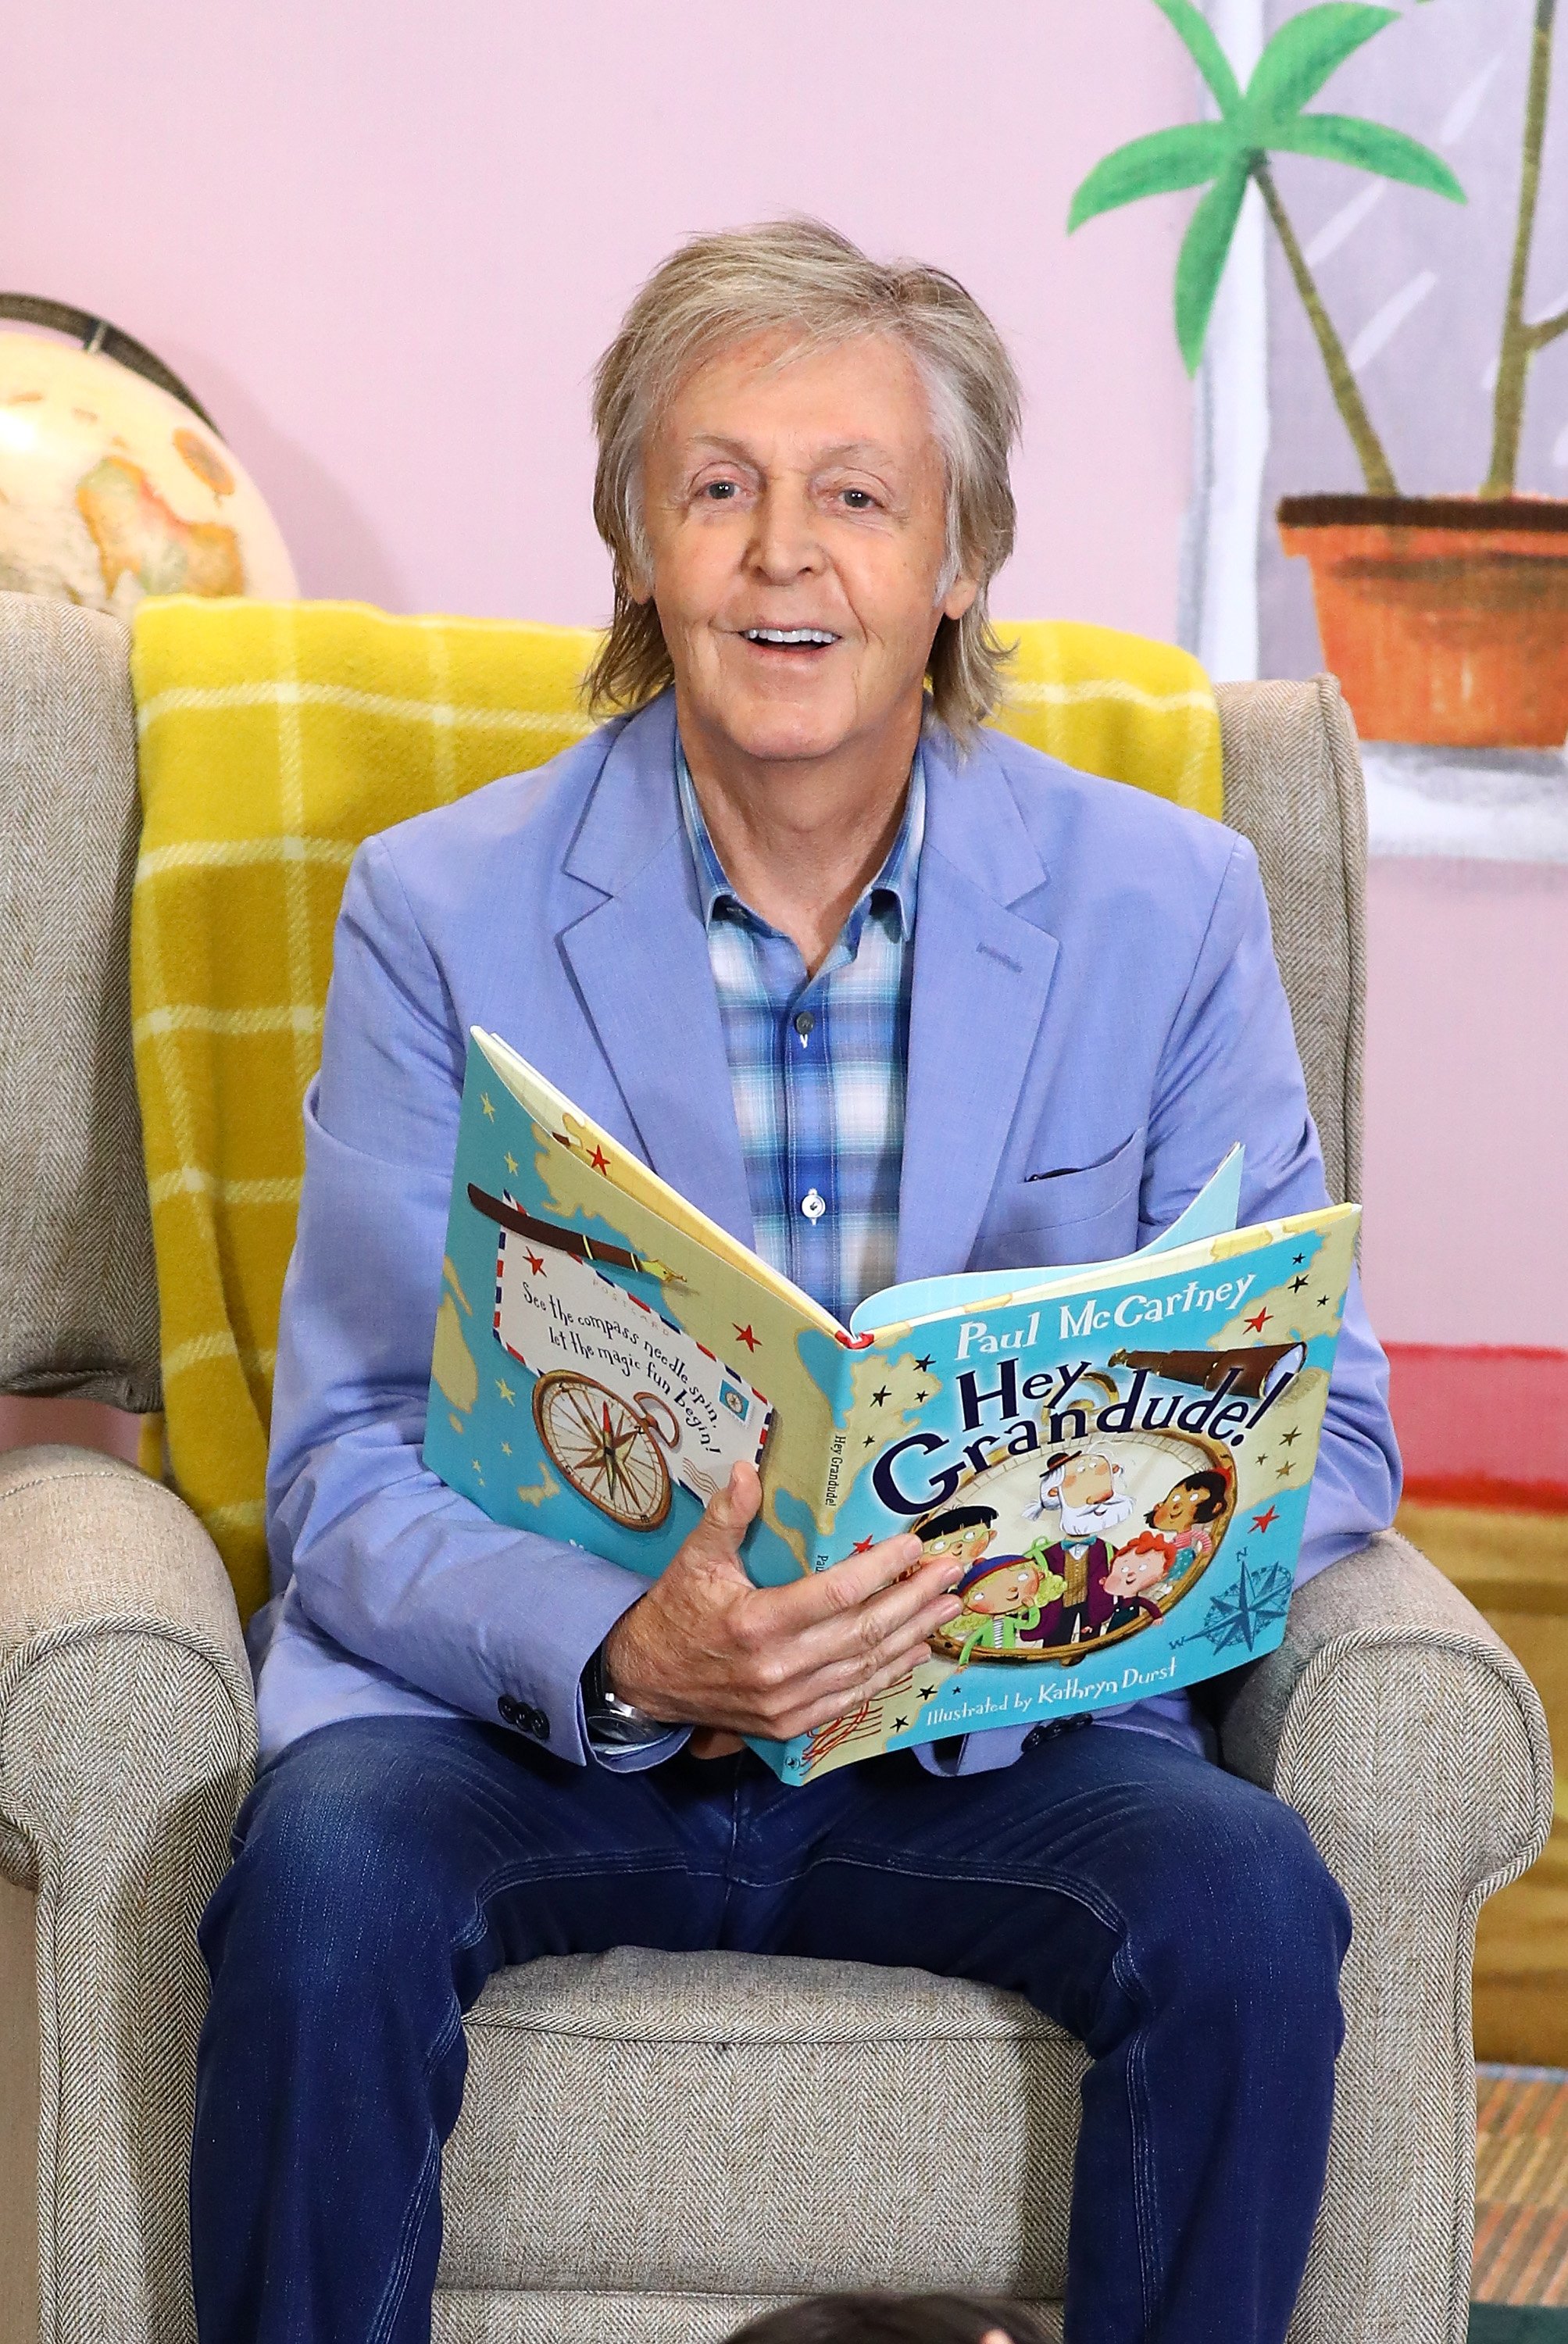 Paul McCartney at Waterstones Piccadilly on September 06, 2019 in London, England | Source: Getty Images